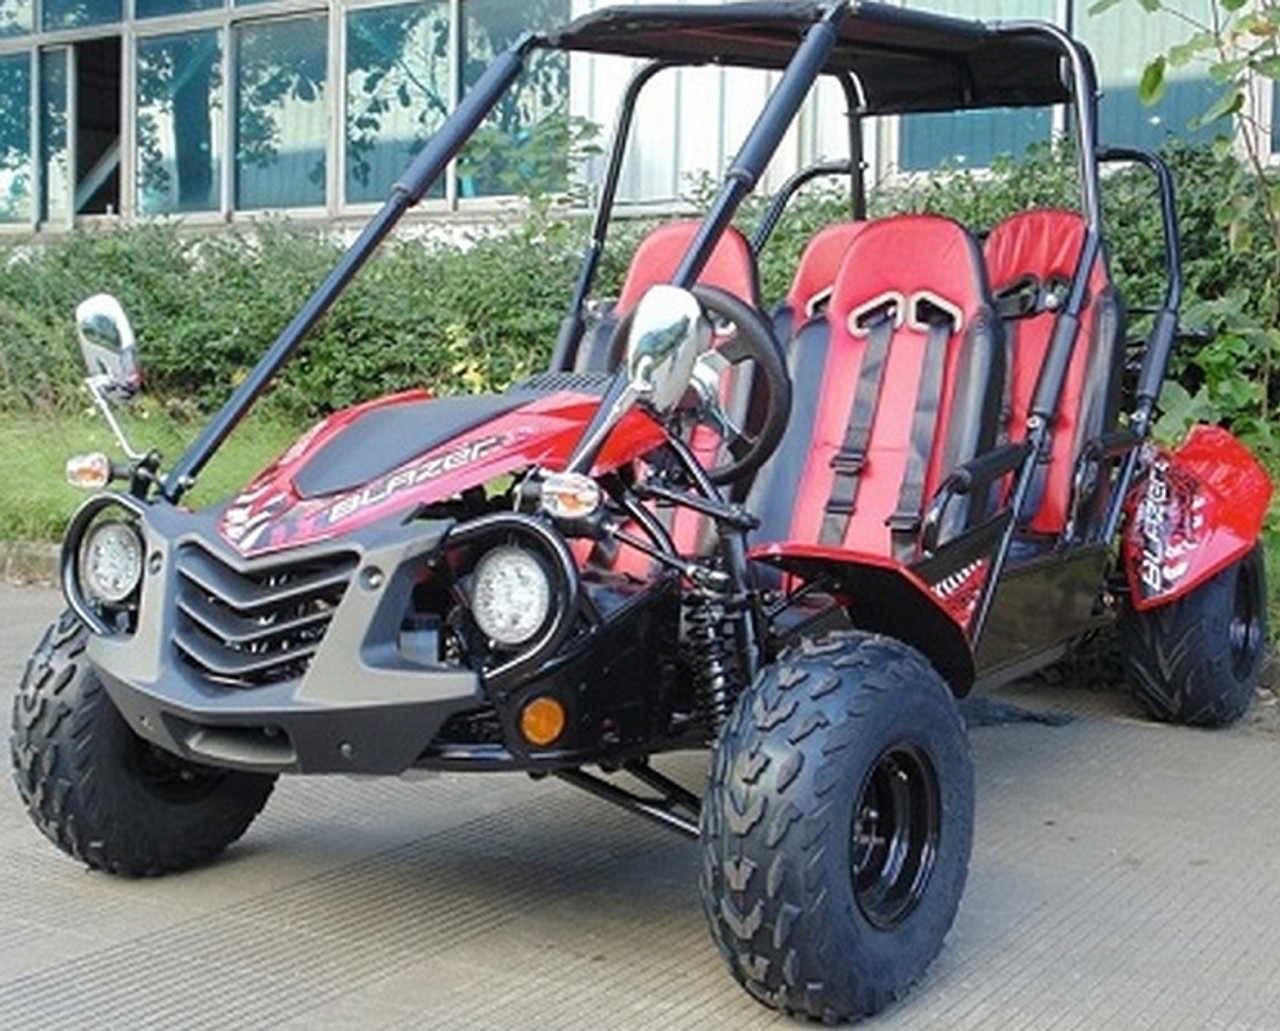 TrailMaster Blazer4 200X 200CC Family Size 4-Seater Go Kart, 4-Stroke, Single Cylinder, Air Cooled - Red